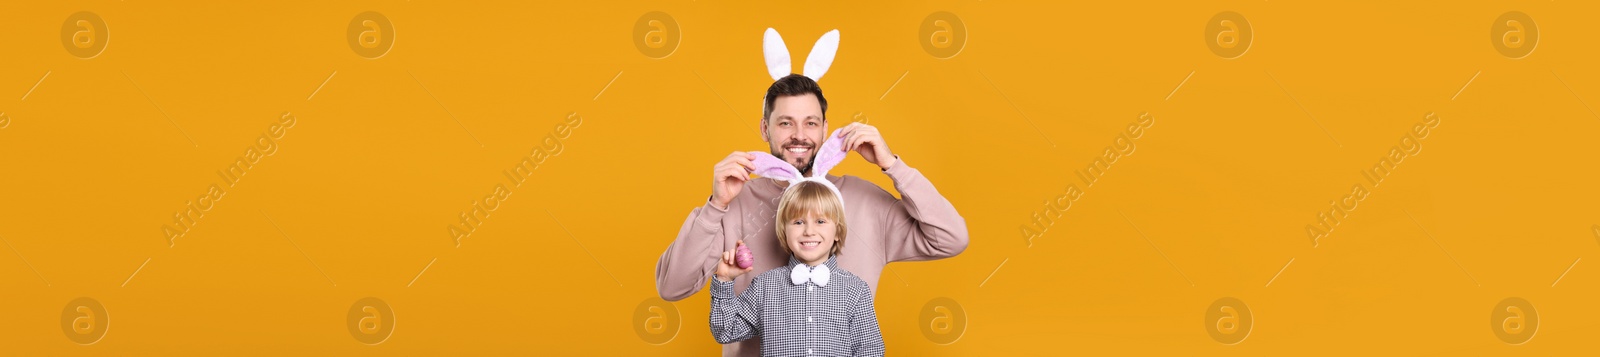 Image of Father and son in bunny ears headbands having fun on orange background, banner design. Easter celebration